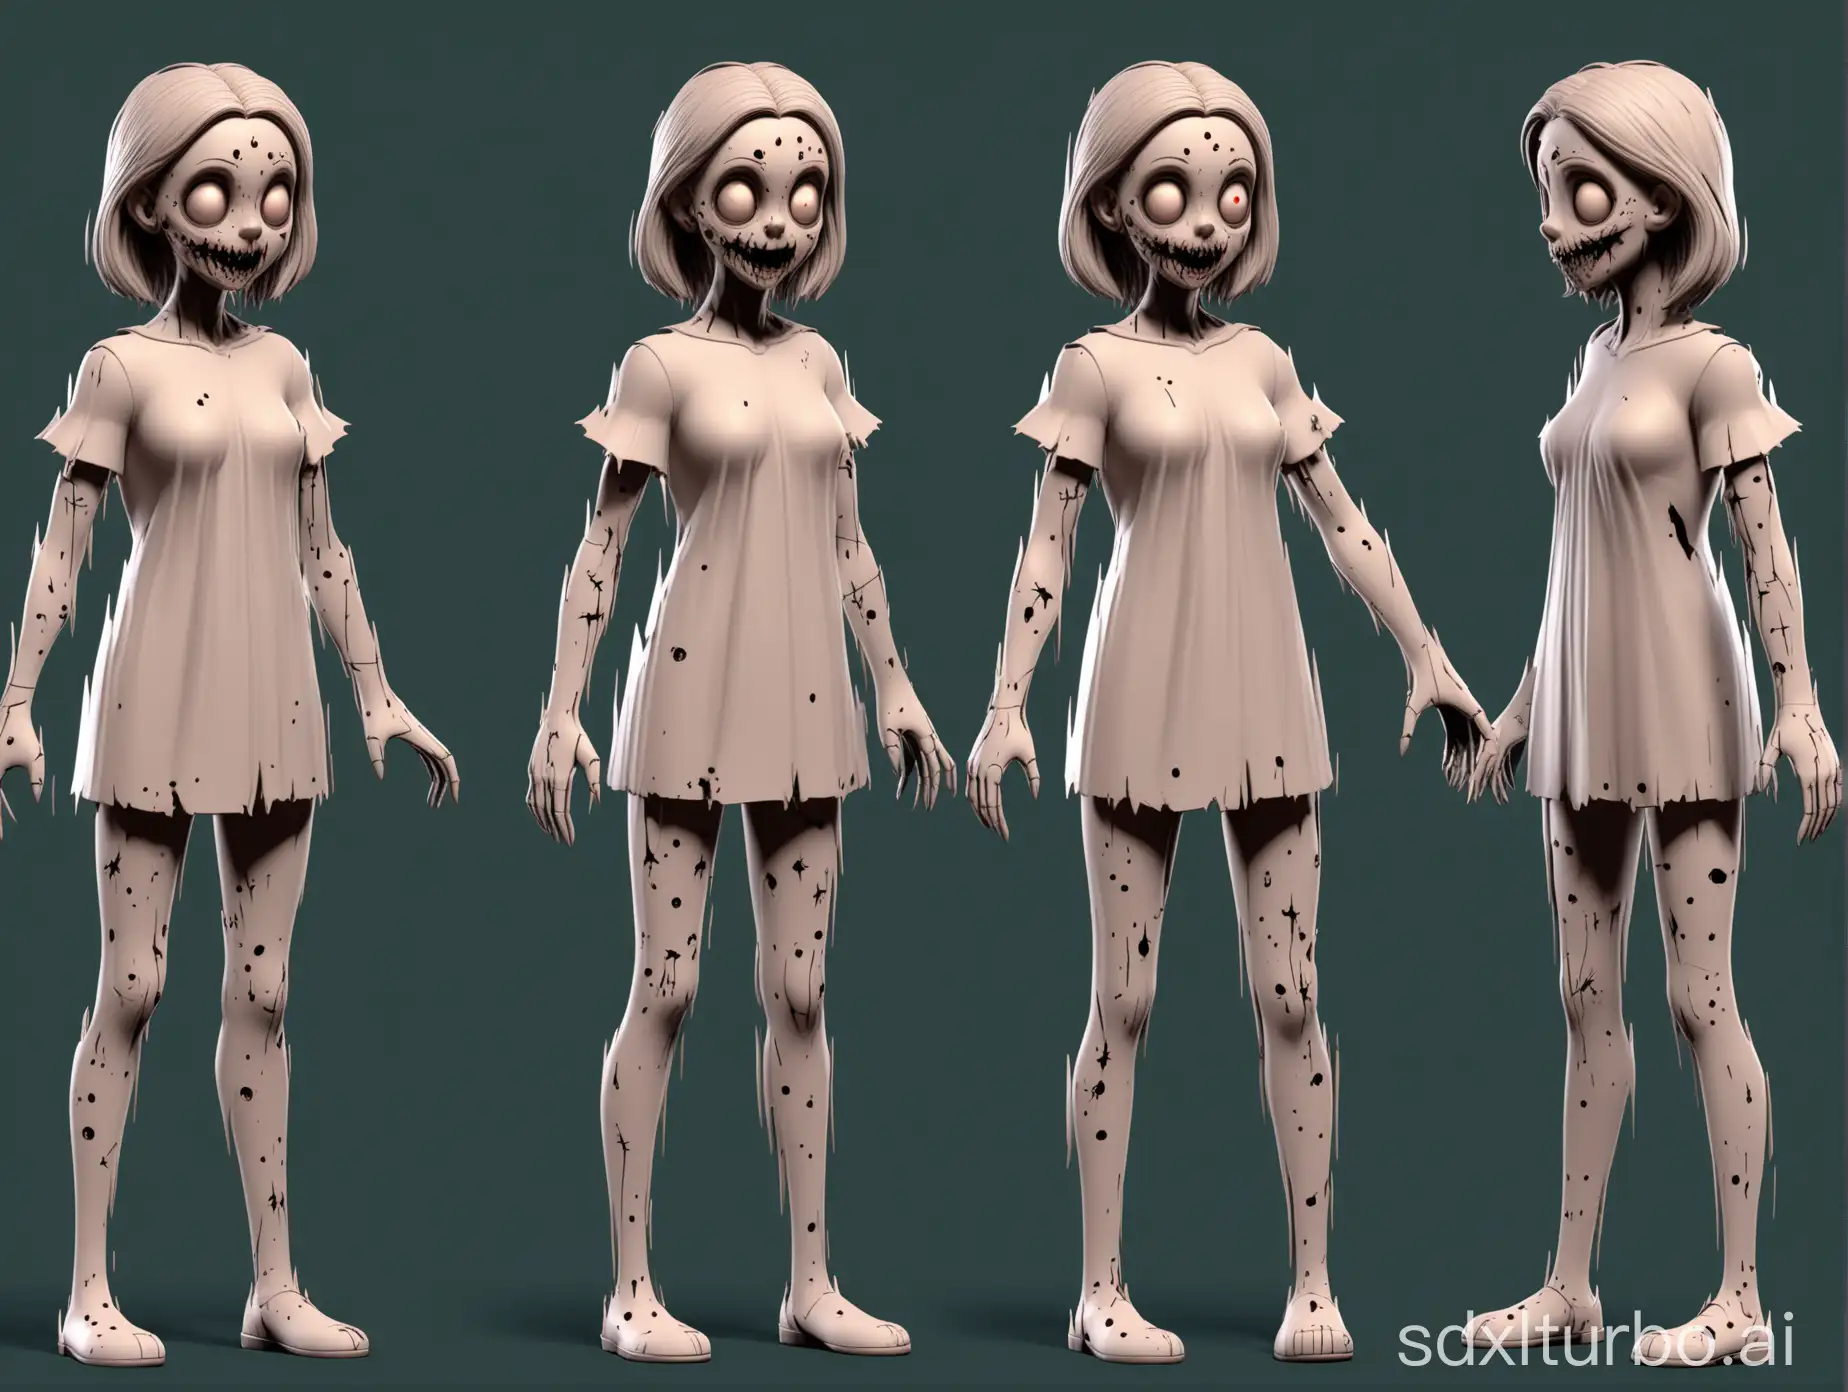 Adorable-Cartoon-Horror-Character-Sheet-3D-Modeling-Reference